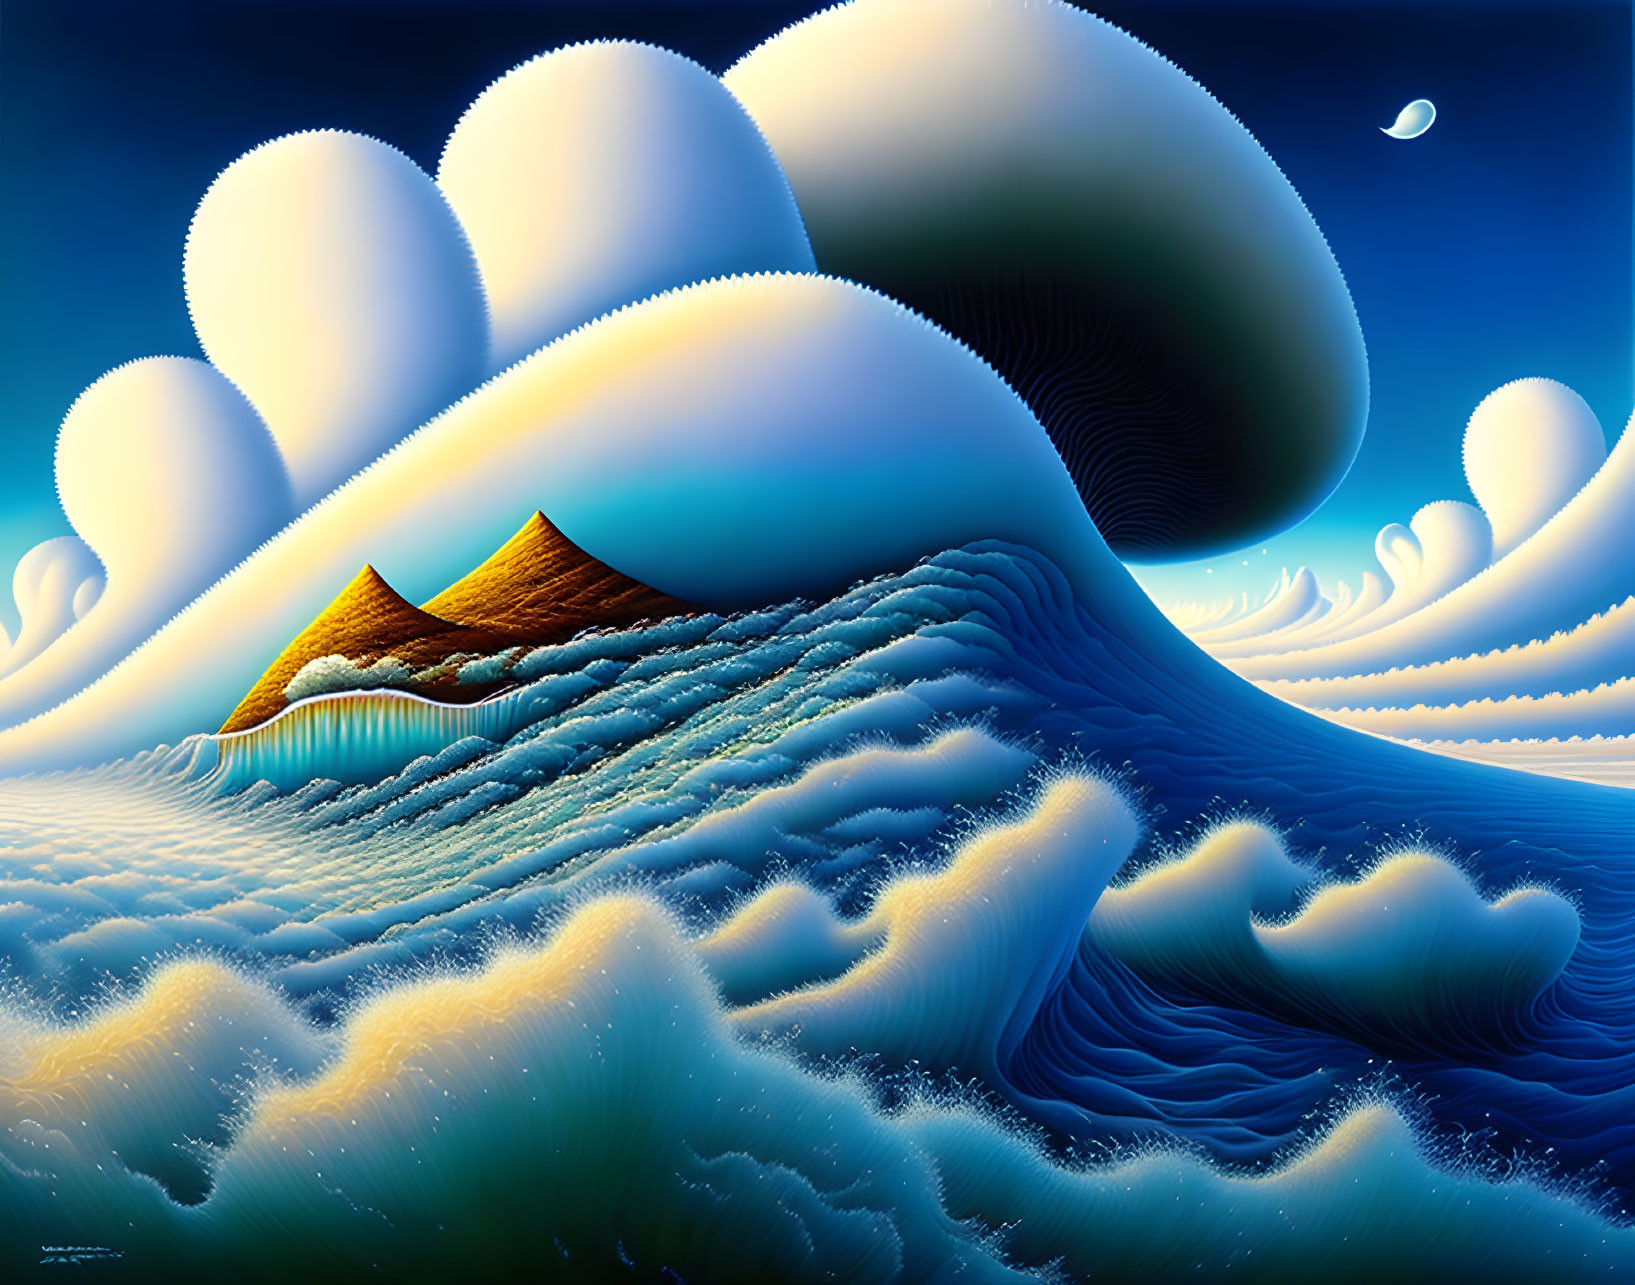 Surreal landscape with stylized waves, crescent moon, and bulbous clouds in blue and